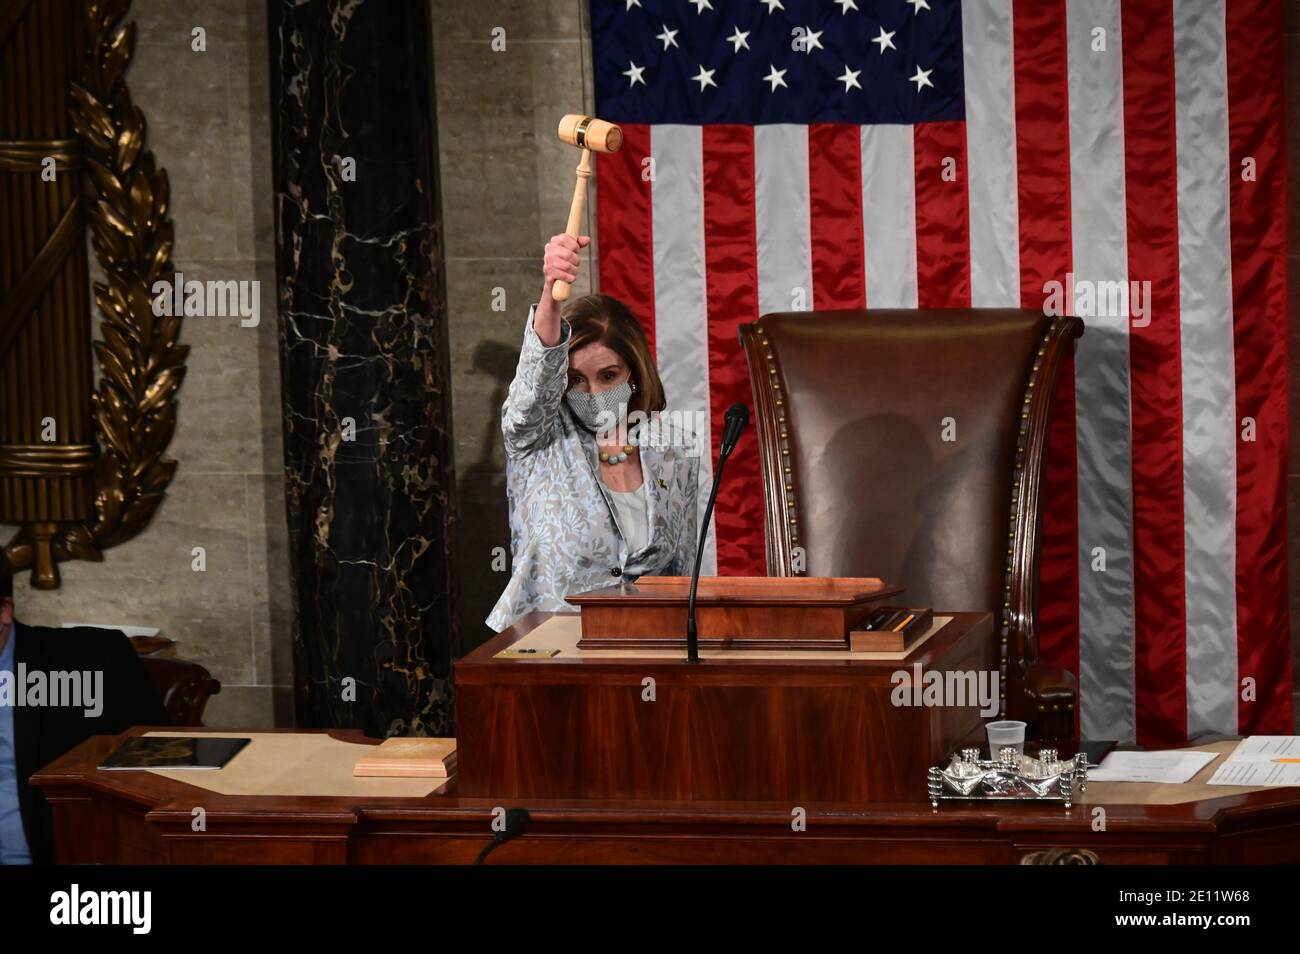 Washington, USA. 03rd Jan, 2021. U.S. Speaker of the House Nancy Pelosi wields the Speaker's gavel after being re-elected as Speaker and preparing to swear in members of the 117th House of Representatives in Washington, U.S., January 3, 2021. (Photo by Erin Scott/Pool/Sipa USA) Credit: Sipa USA/Alamy Live News Stock Photo